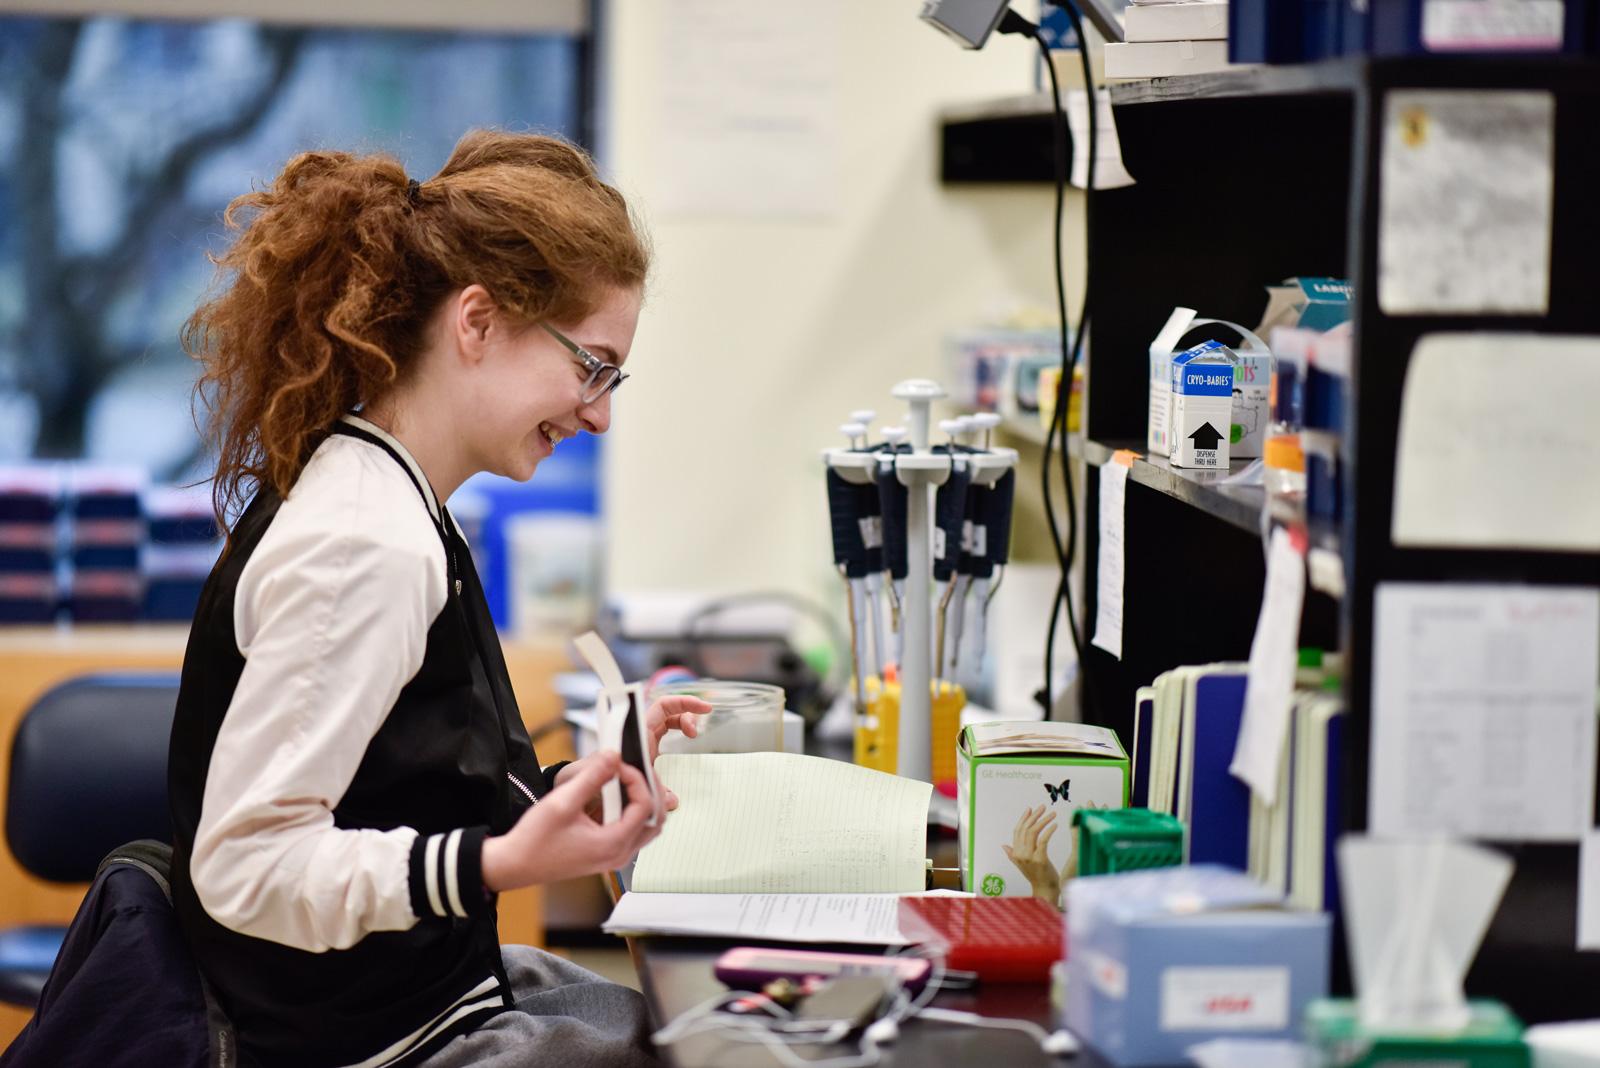 A student works in a lab.